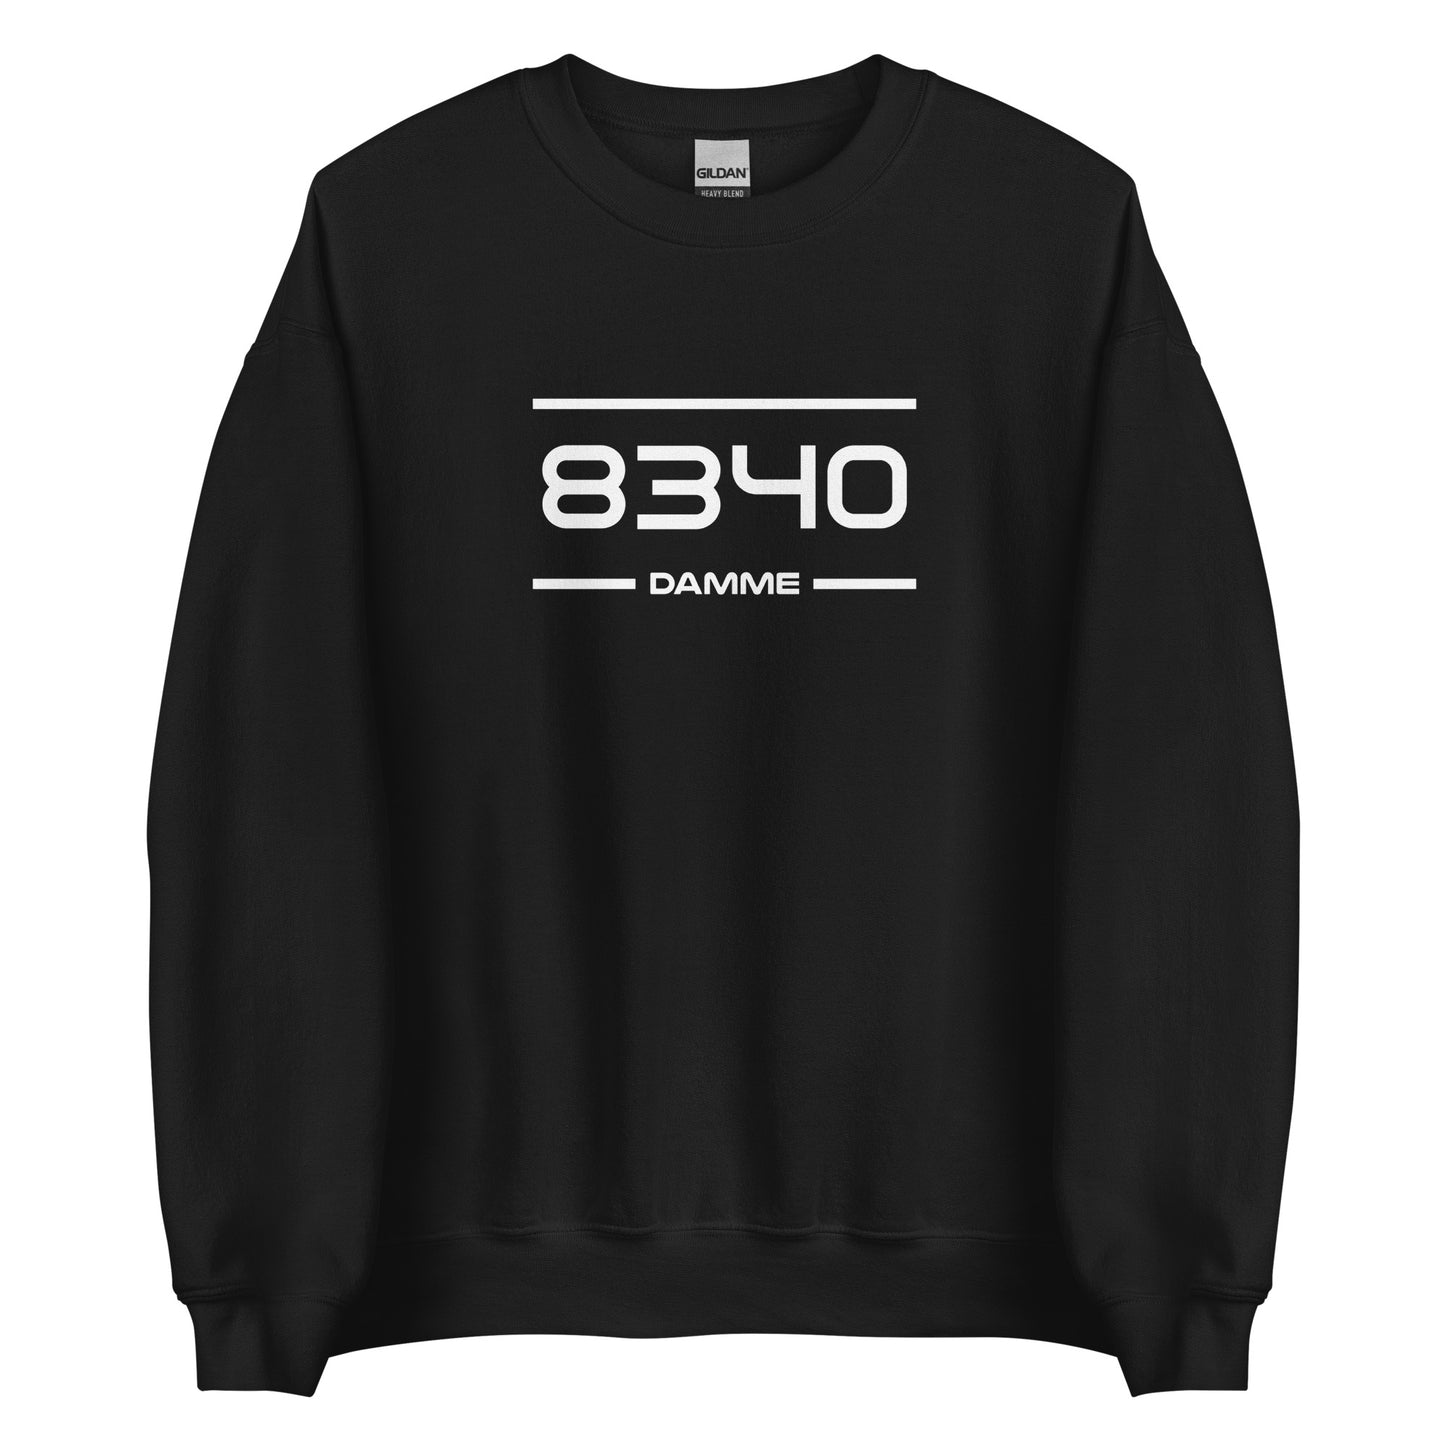 Sweater - 8340 - Damme (M/V)